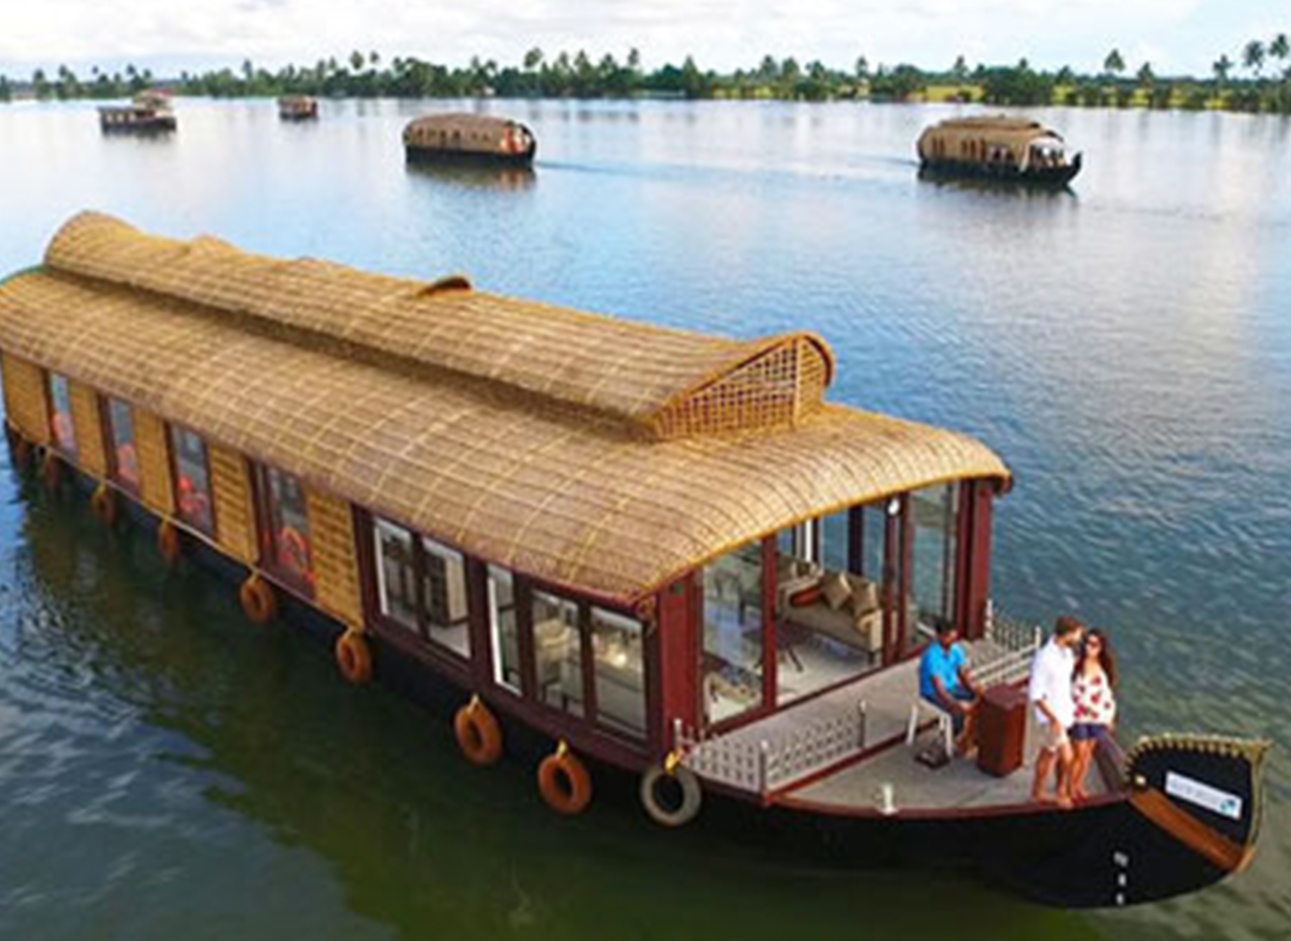 Houseboat Cruise - Relaxing cruise amidst picturesque surroundings